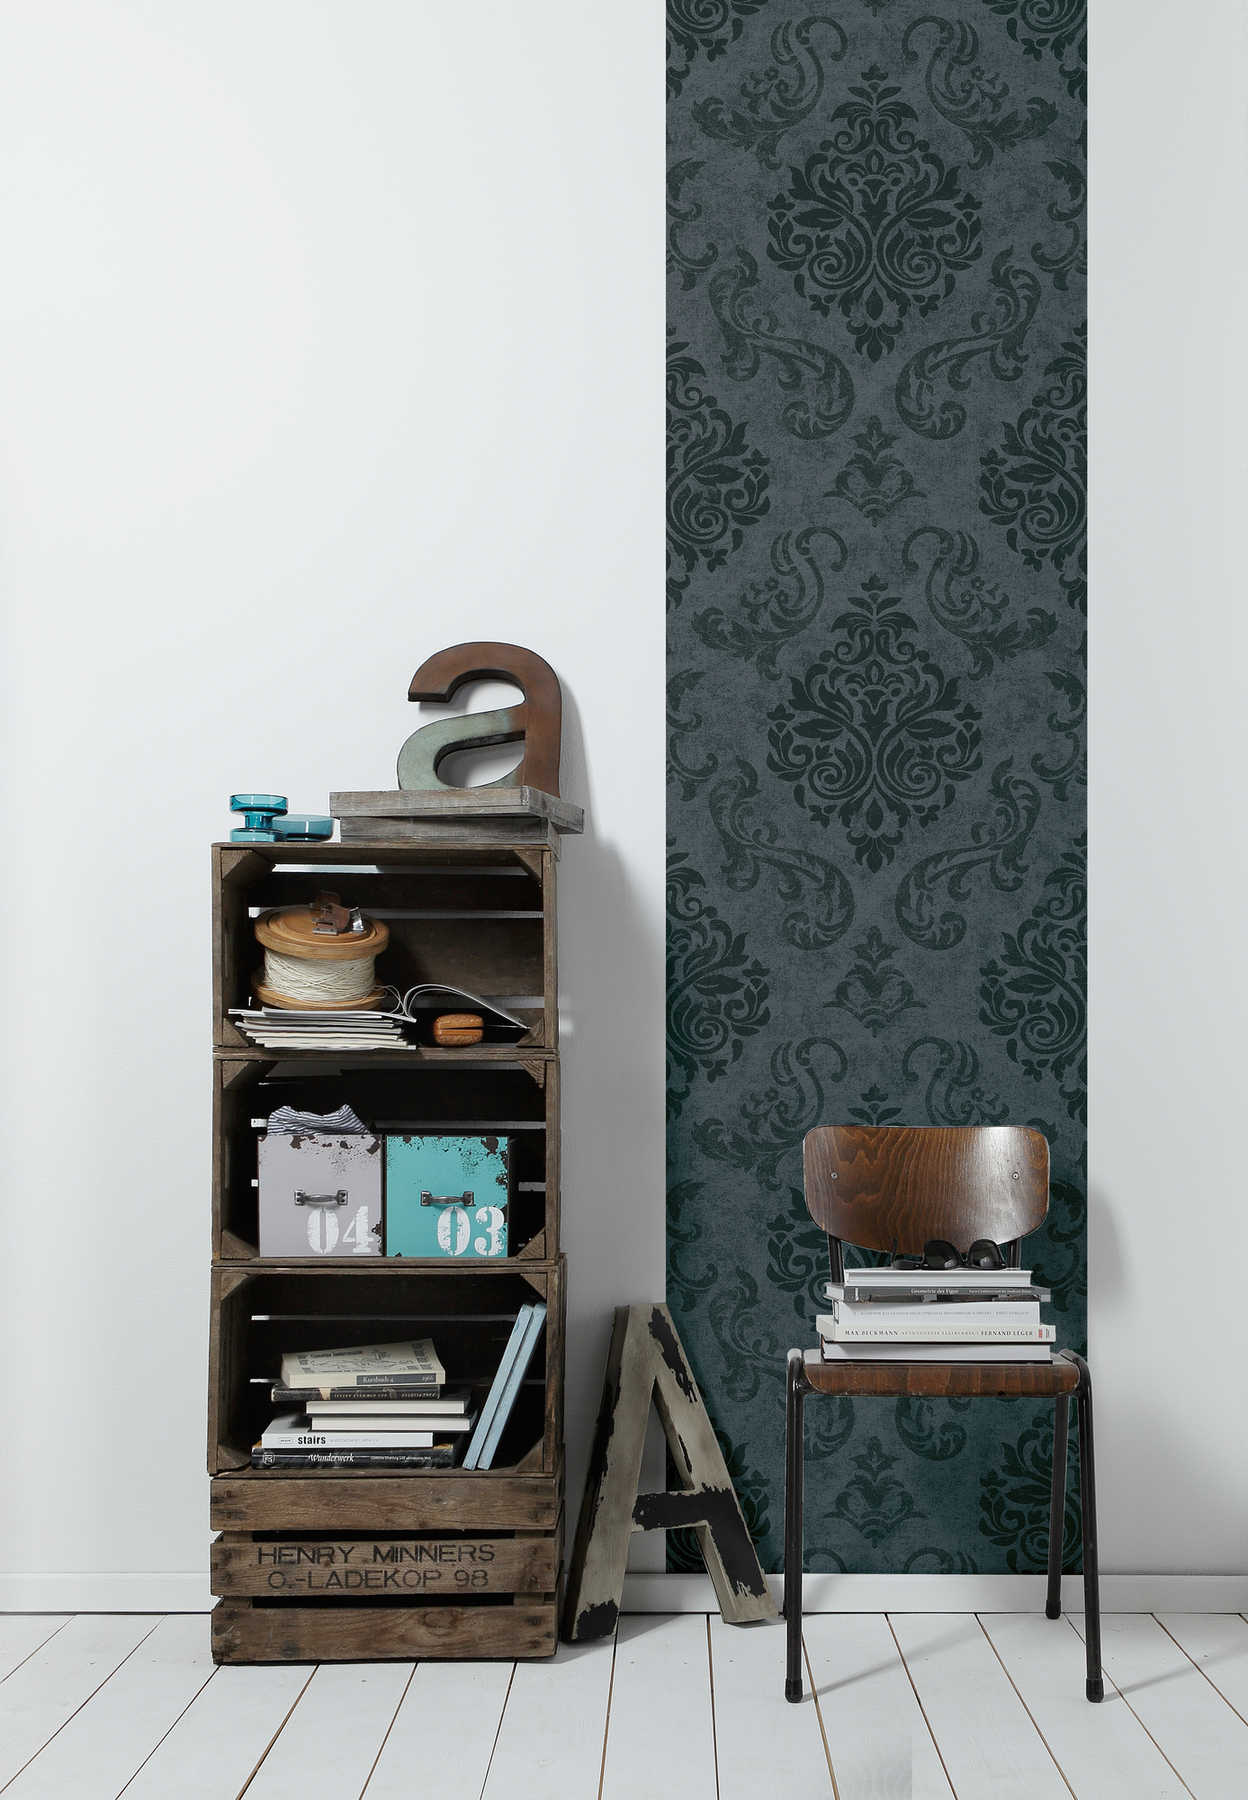             Baroque ornament wallpaper with textured pattern in used look - black
        